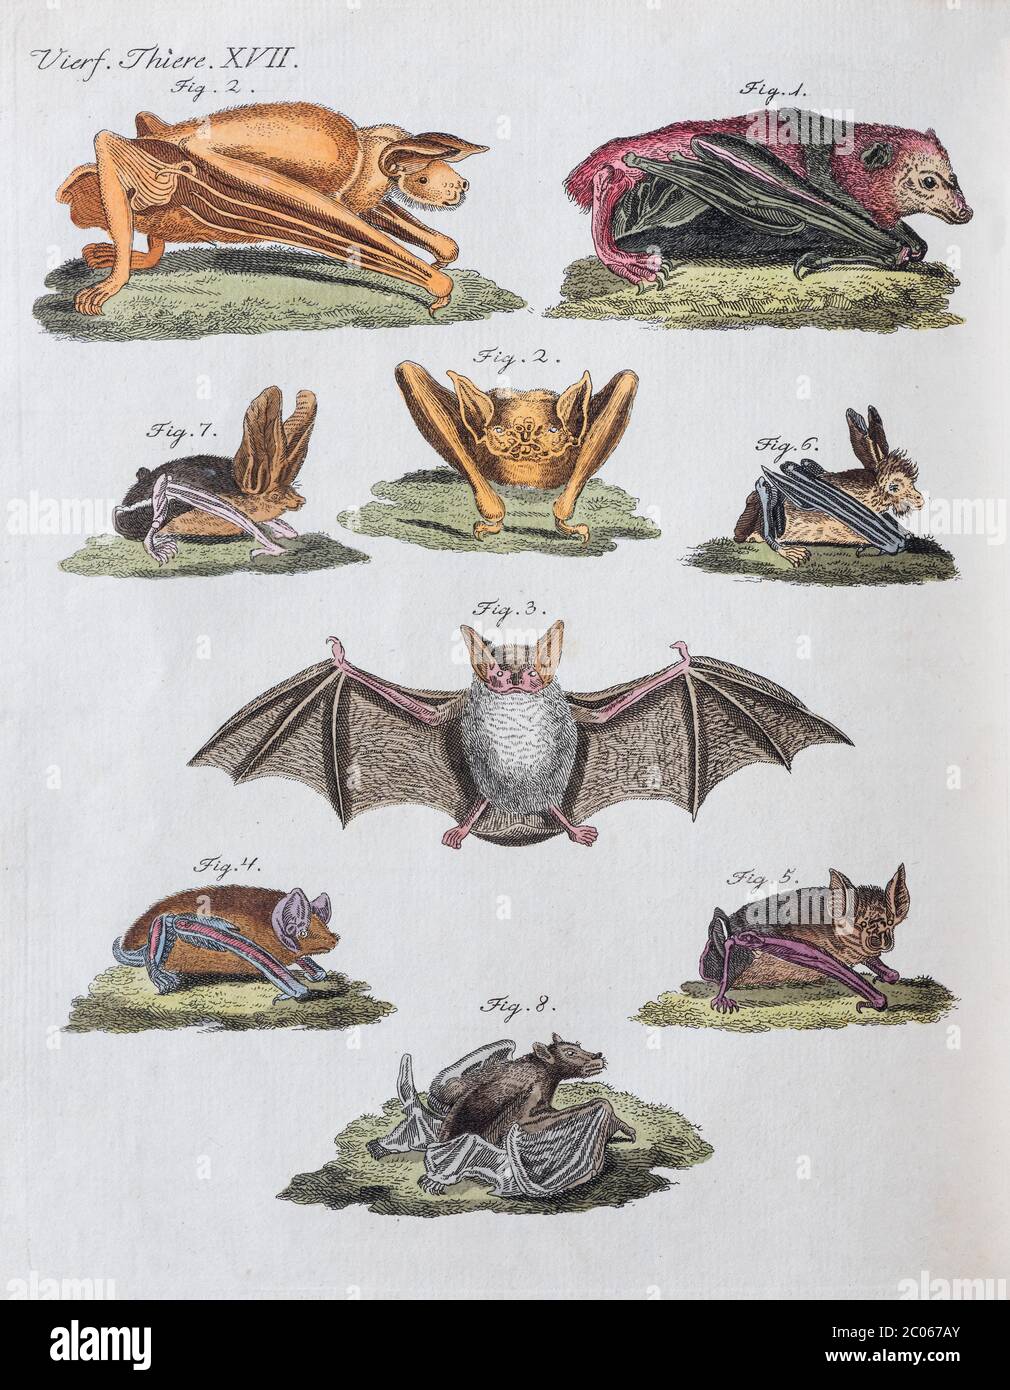 Microbats (Microchiroptera), hand-colored copperplate engraving from Friedrich Justin Bertuch Picture Book for Children, 1801, Weimar, Germany Stock Photo